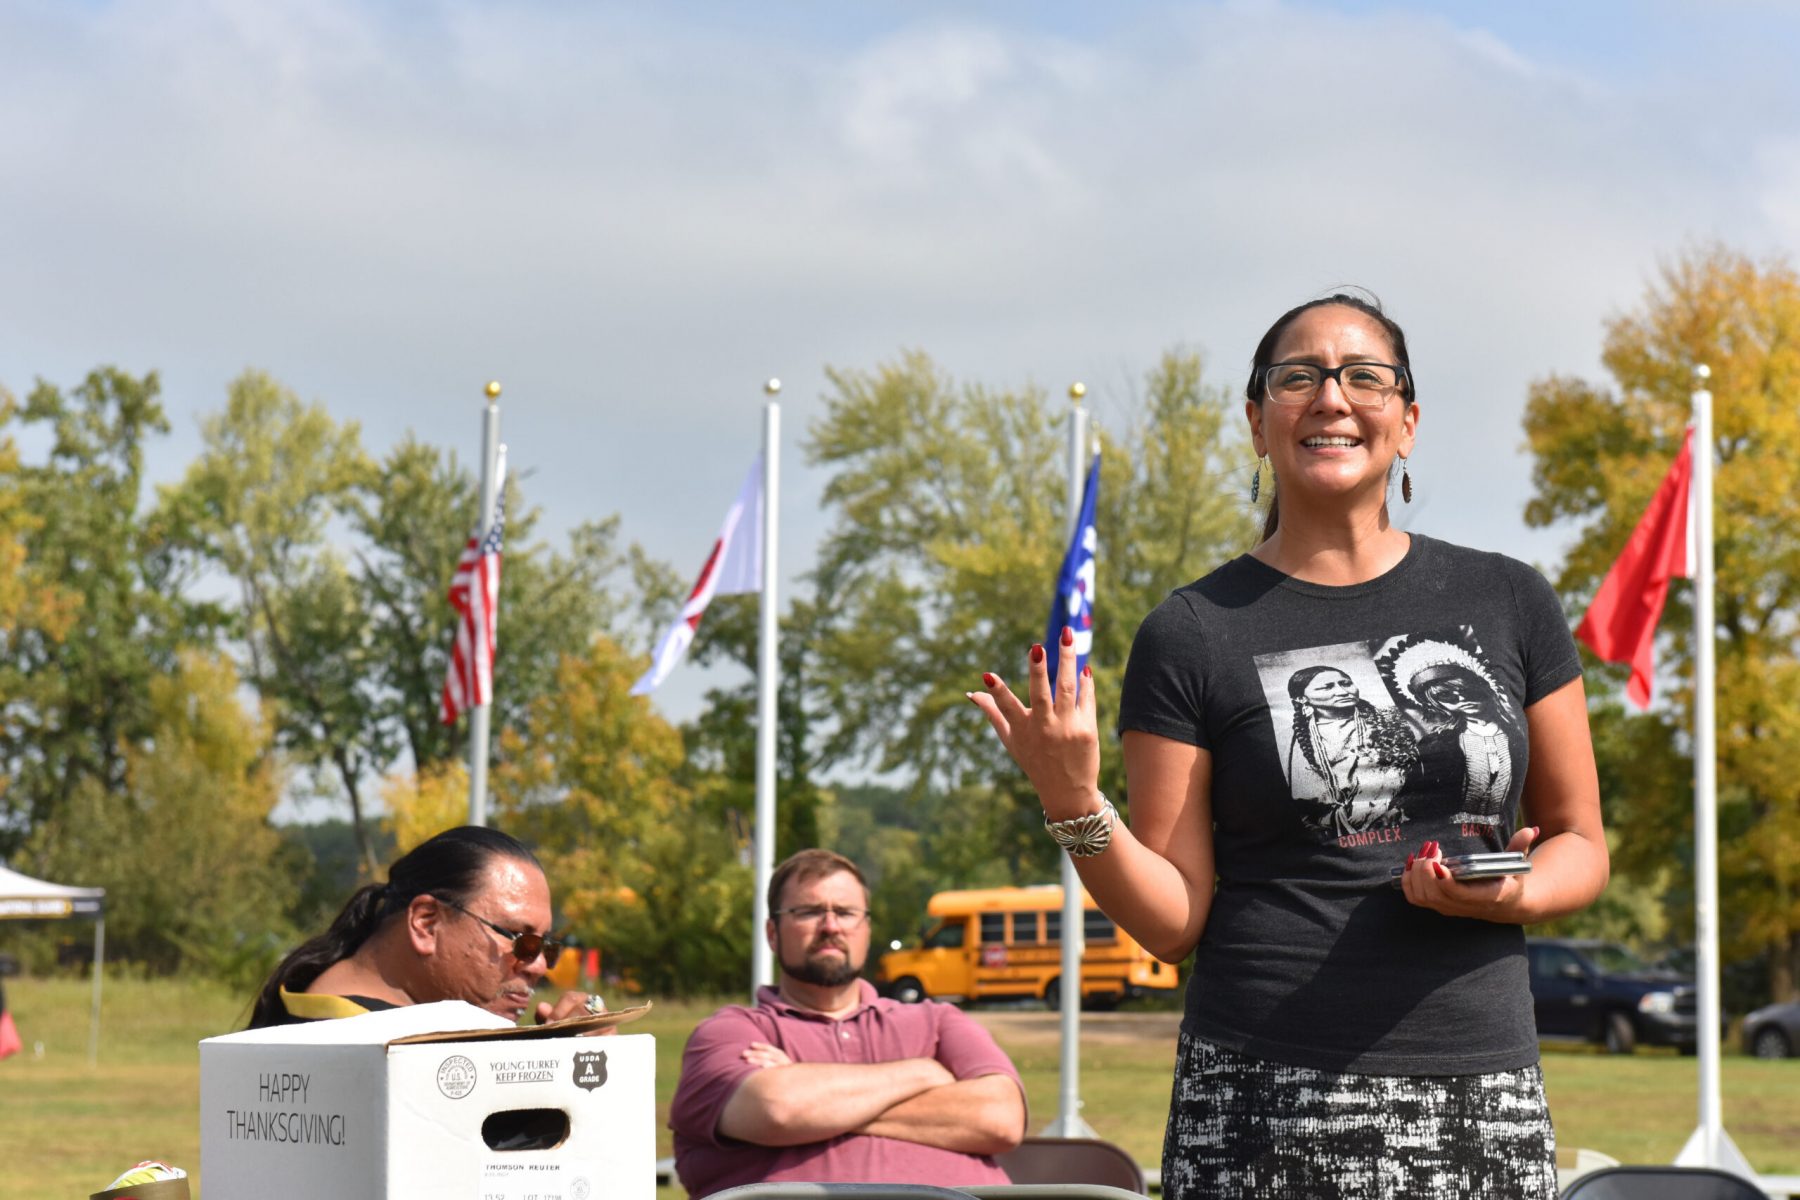 Allissa Waukau, public engagement liaison for the offices of Governor Tim Walz and Lt. Governor Peggy Flanagan shares the best wishes of our state representatives to a group of Minnesota National Guard Soldiers and tribal students during the 'Planting for the Future' event on Camp Ripley Sept. 20, 2019.